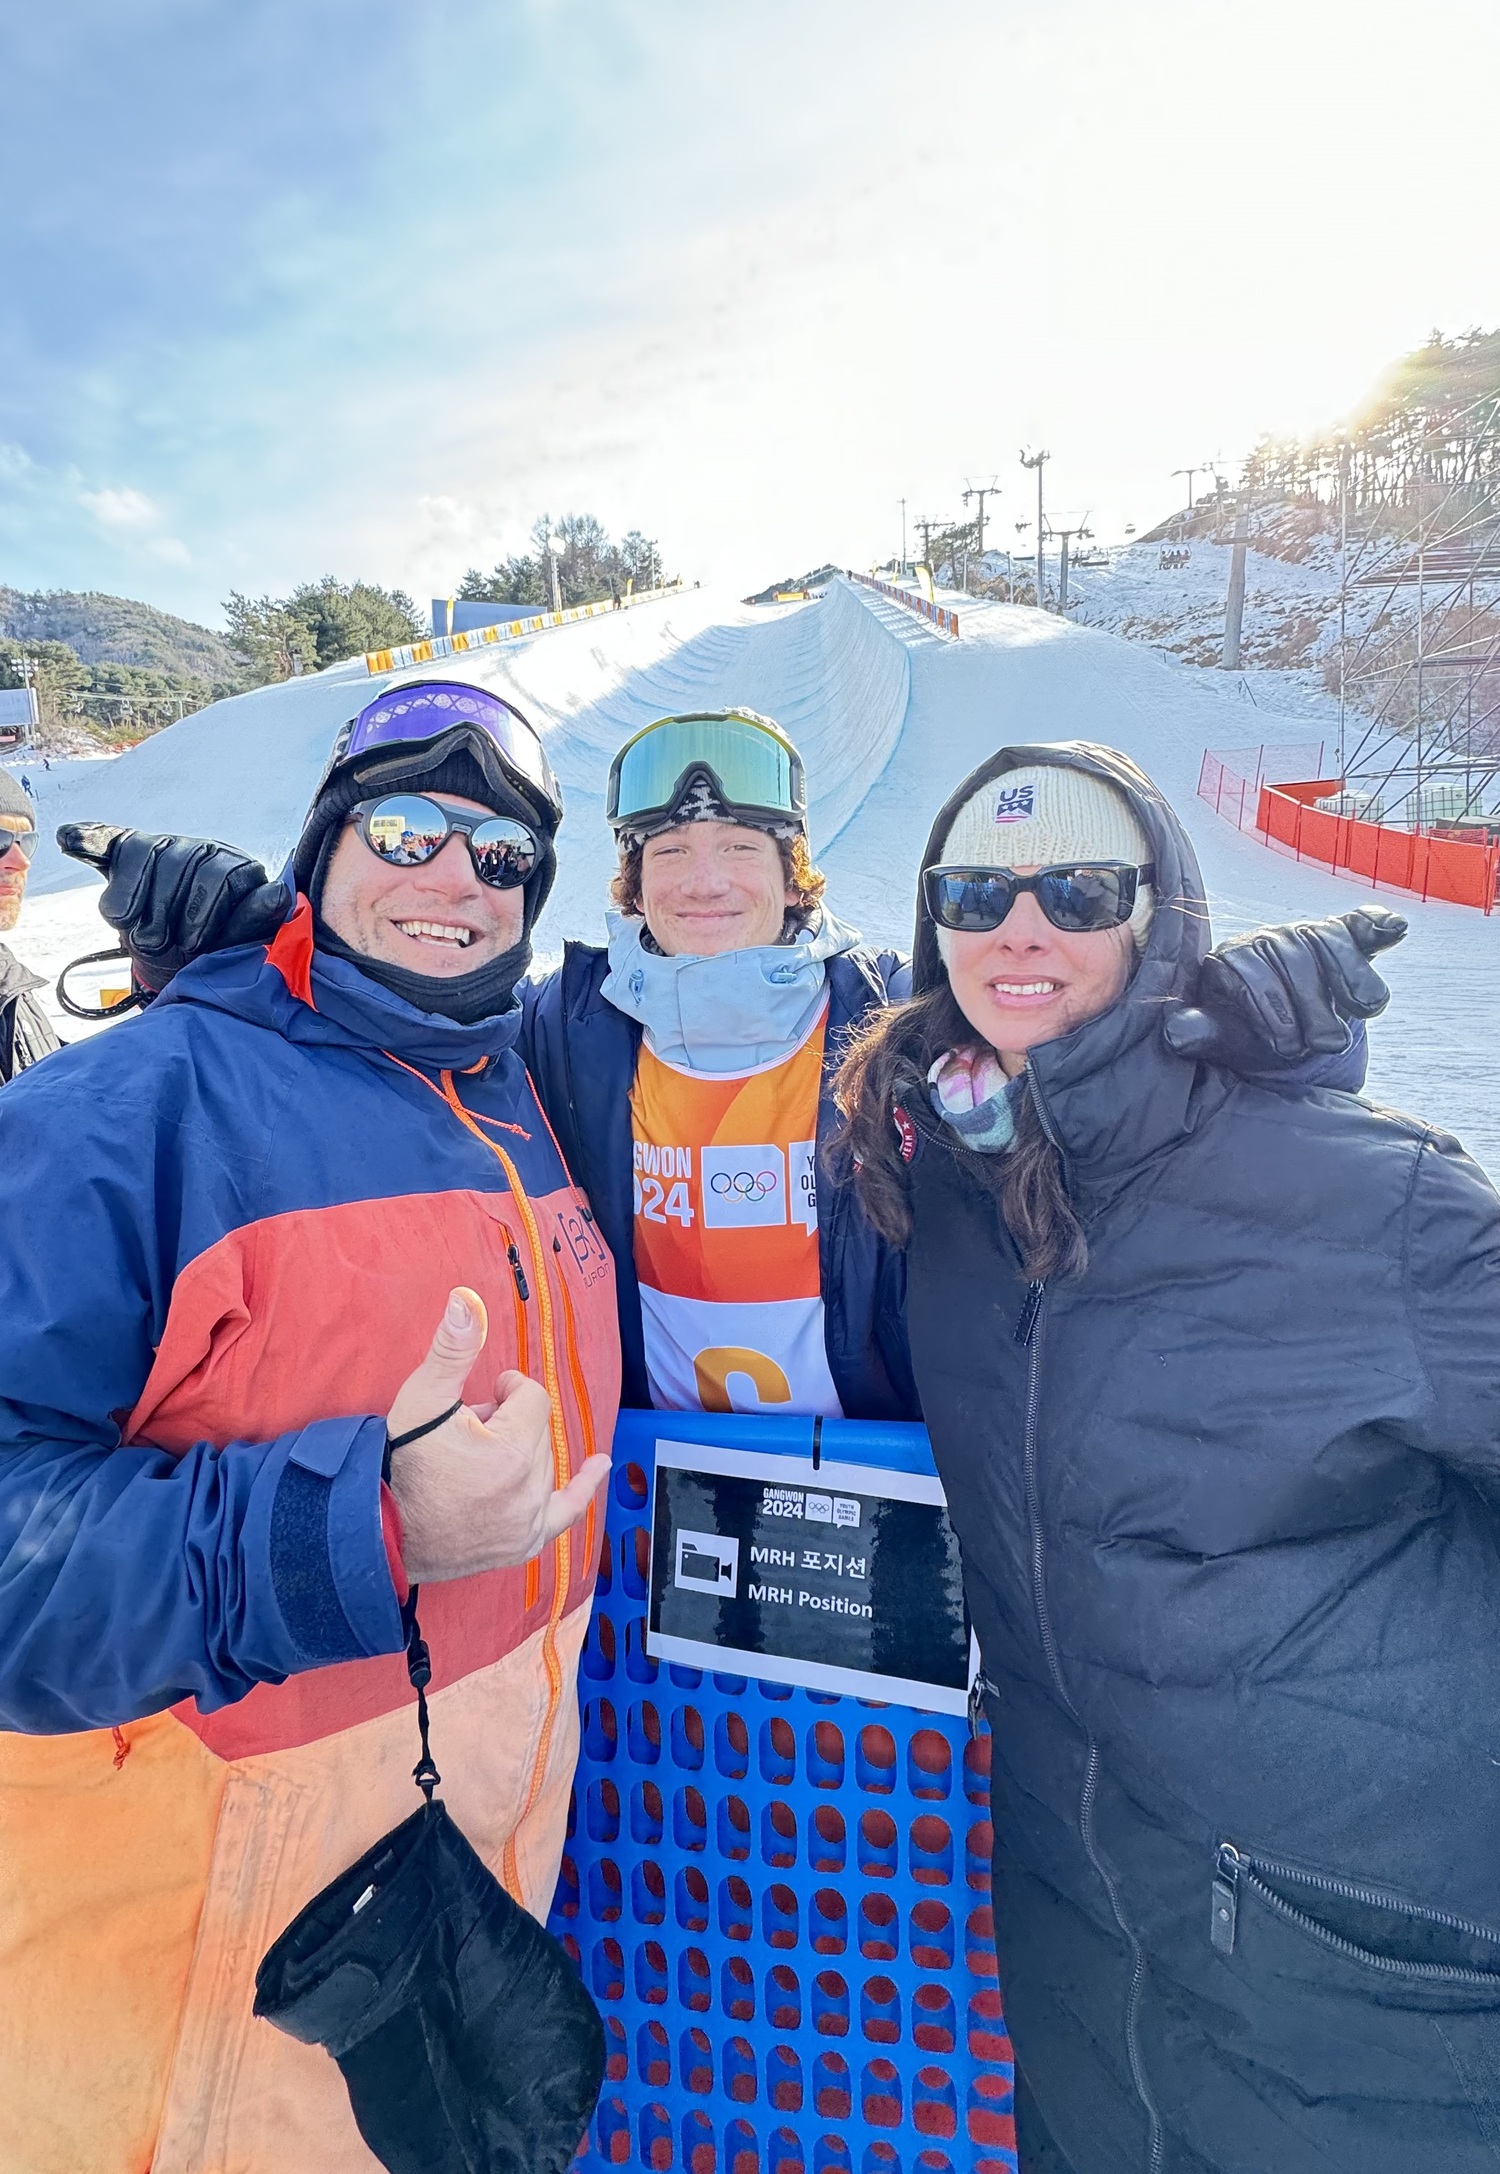 Noah Avallone, center, with his parents, Michael and Michelle, in Gangwon, South Korea. Noah competed in the men's halfpipe at the Youth Olympics there in January, representing the United States.